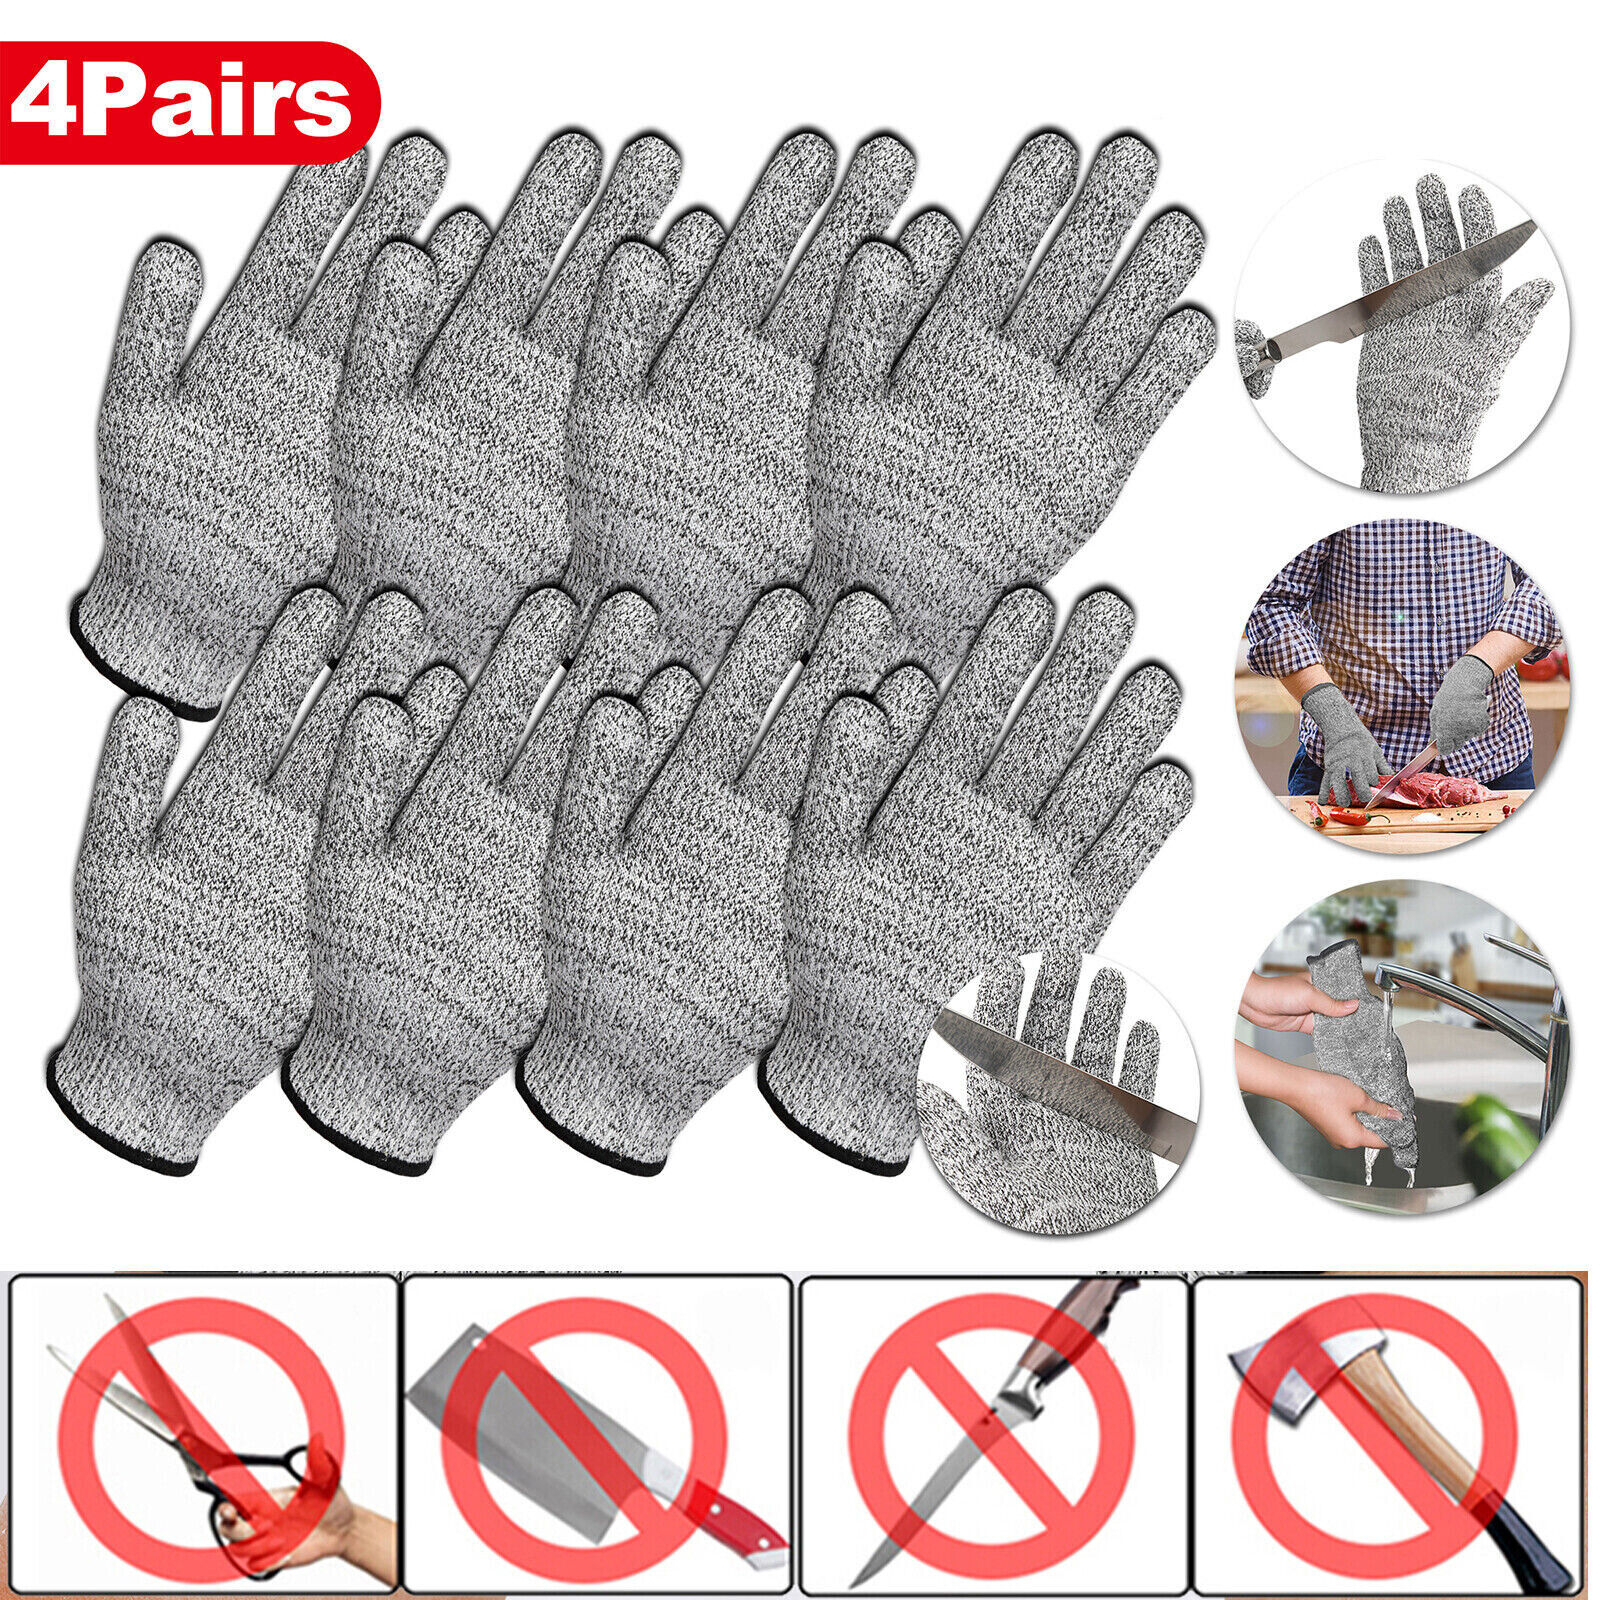 4Pairs Butcher Glove Cut Proof Stab Resistant Safety Gloves Kitchen L5 Protectio